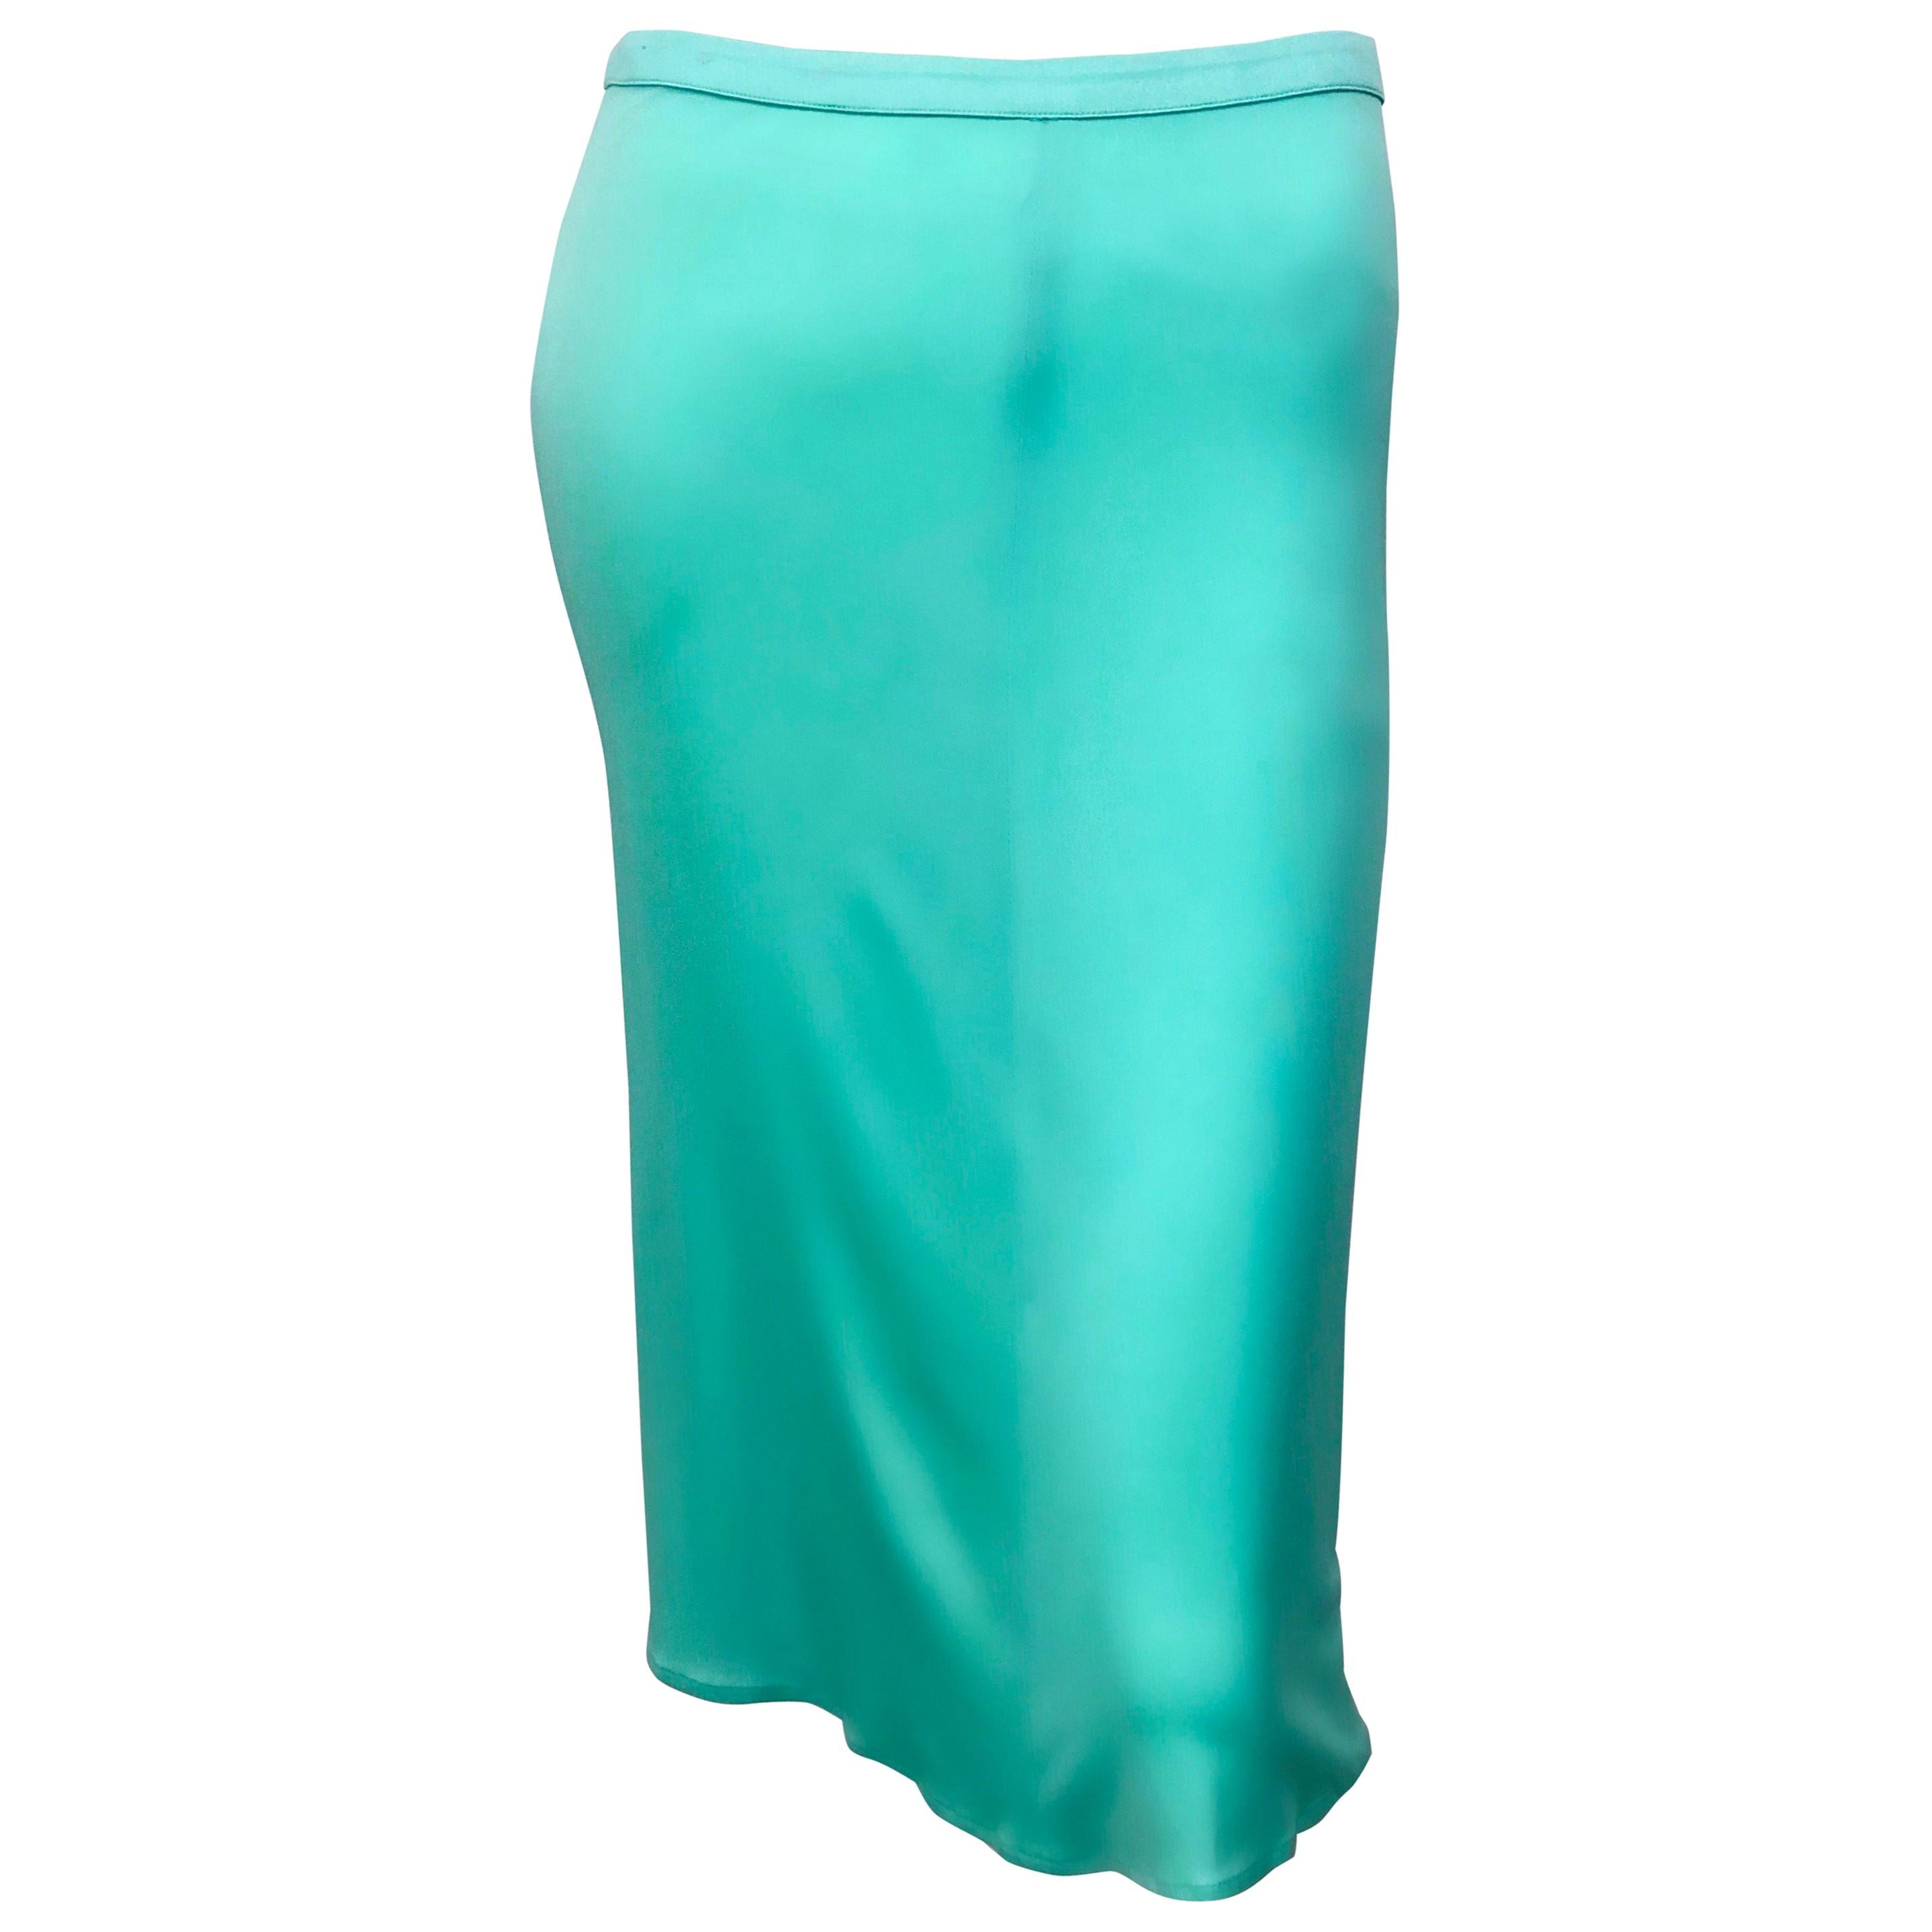 1990s Gianni Versace Couture Teal Turquoise Blue Silk Jersey Vintage 90s Skirt